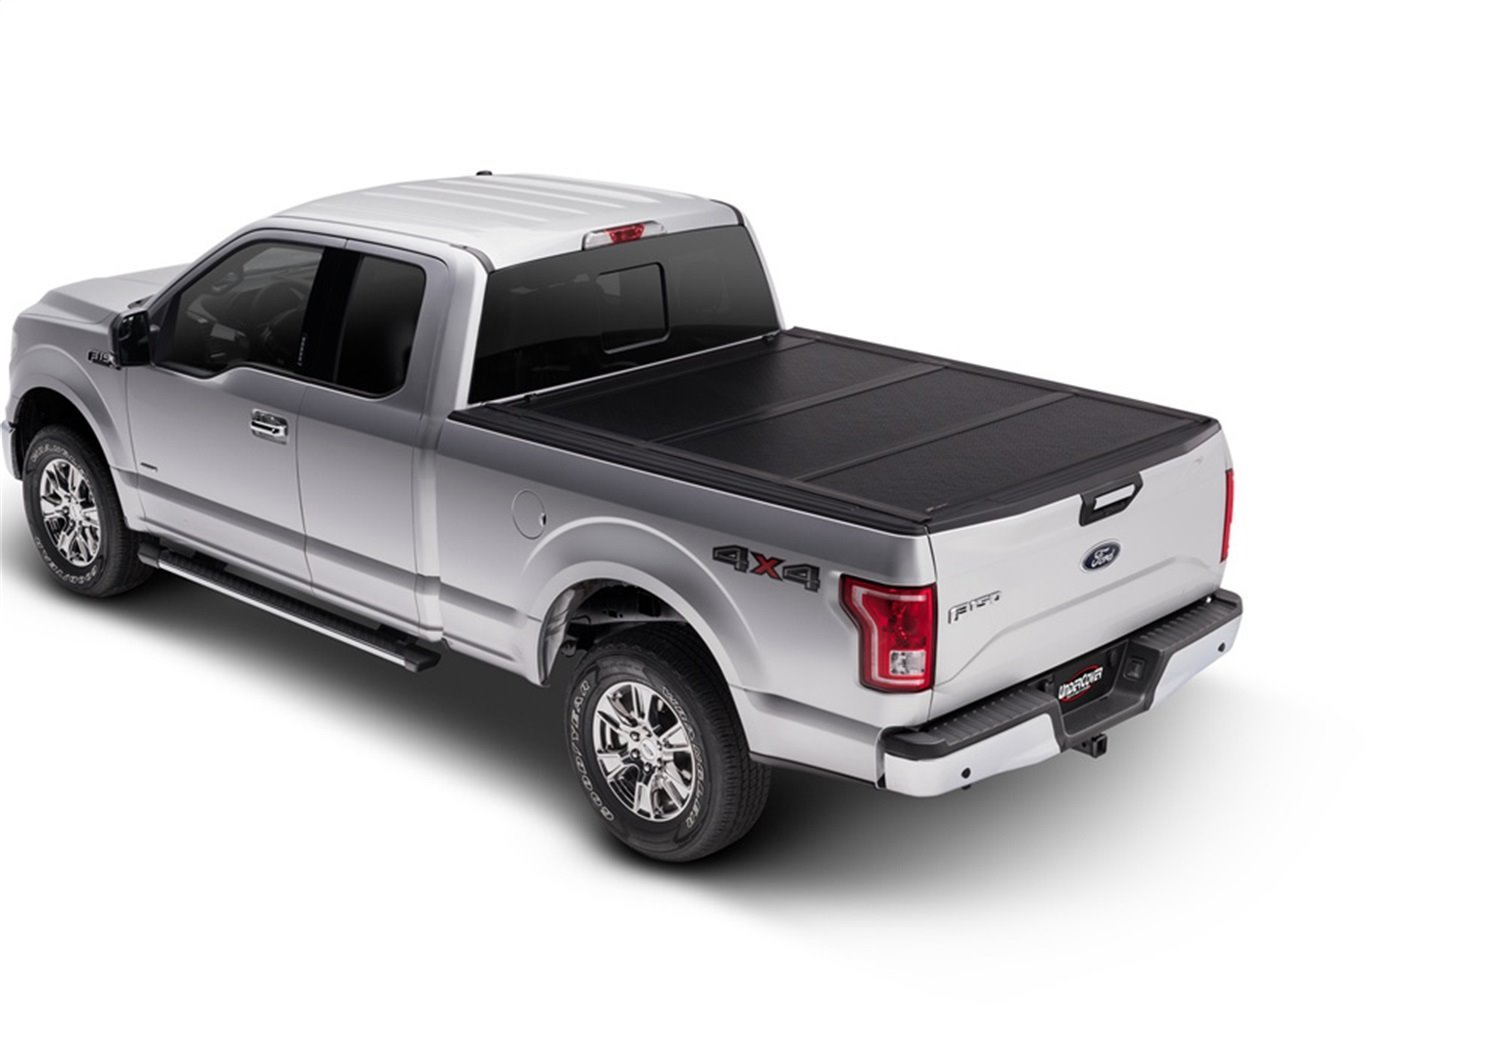 FX21031 Flex Hard Folding Cover, Fits Select Ford F-150 8'2" Bed STD/EXT/Crew, Black Textured